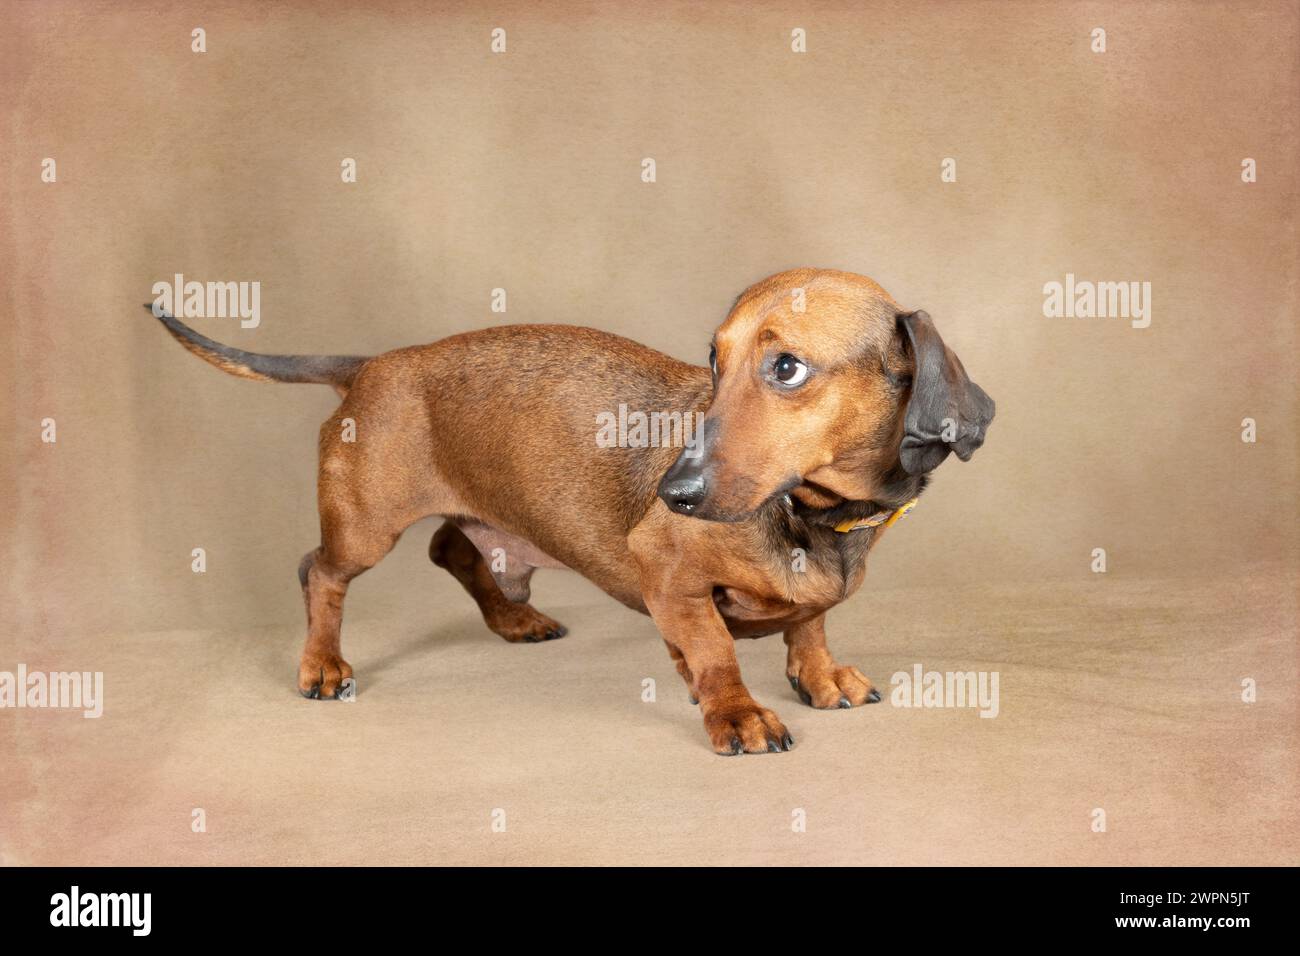 Horizontal shot of a smooth red dachshund looking scared and guilty. Stock Photo